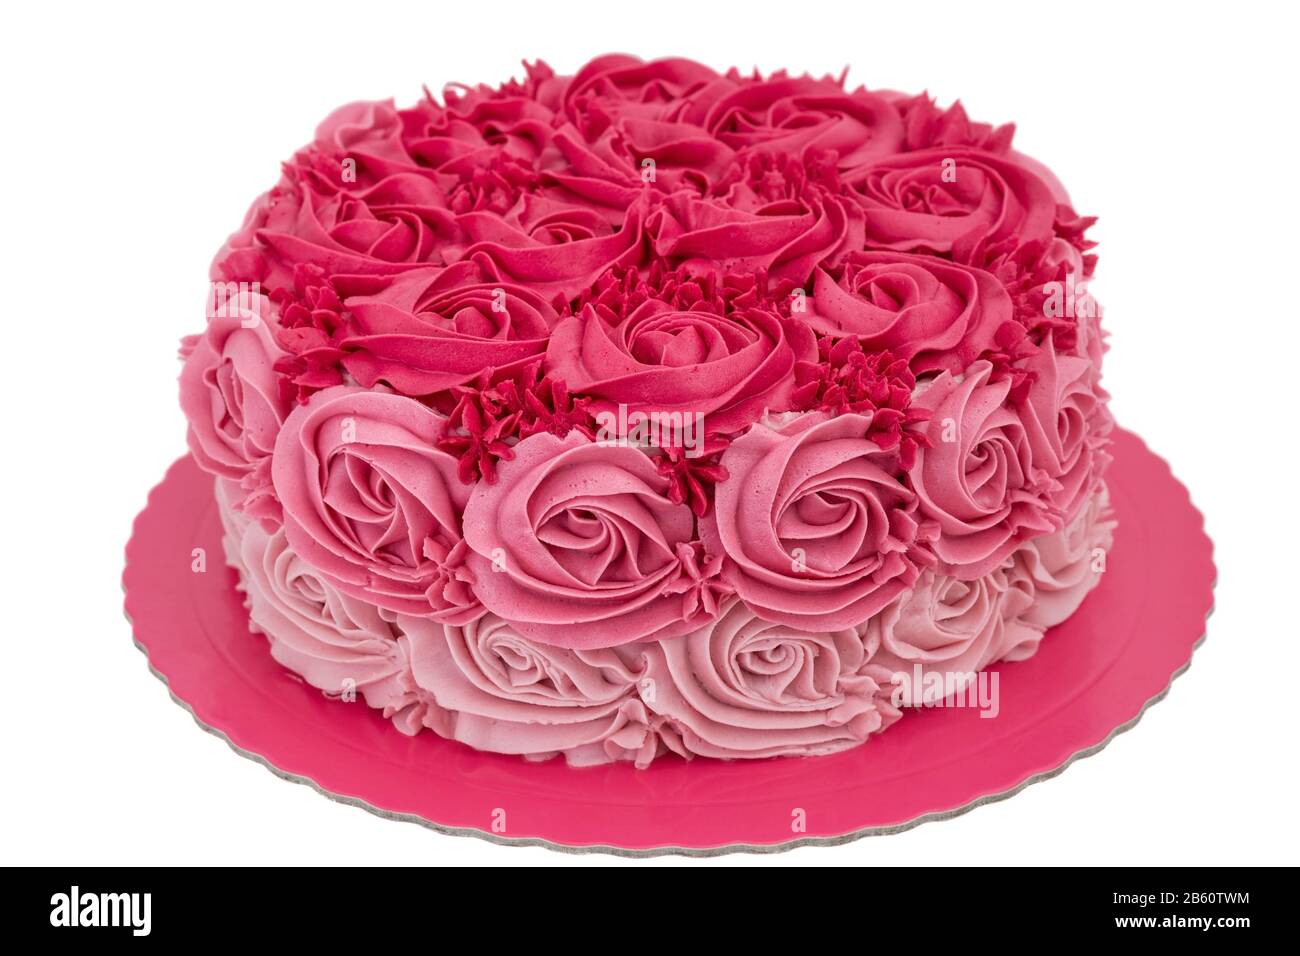 Pink cream cake for my birthday. On a white background Stock Photo - Alamy